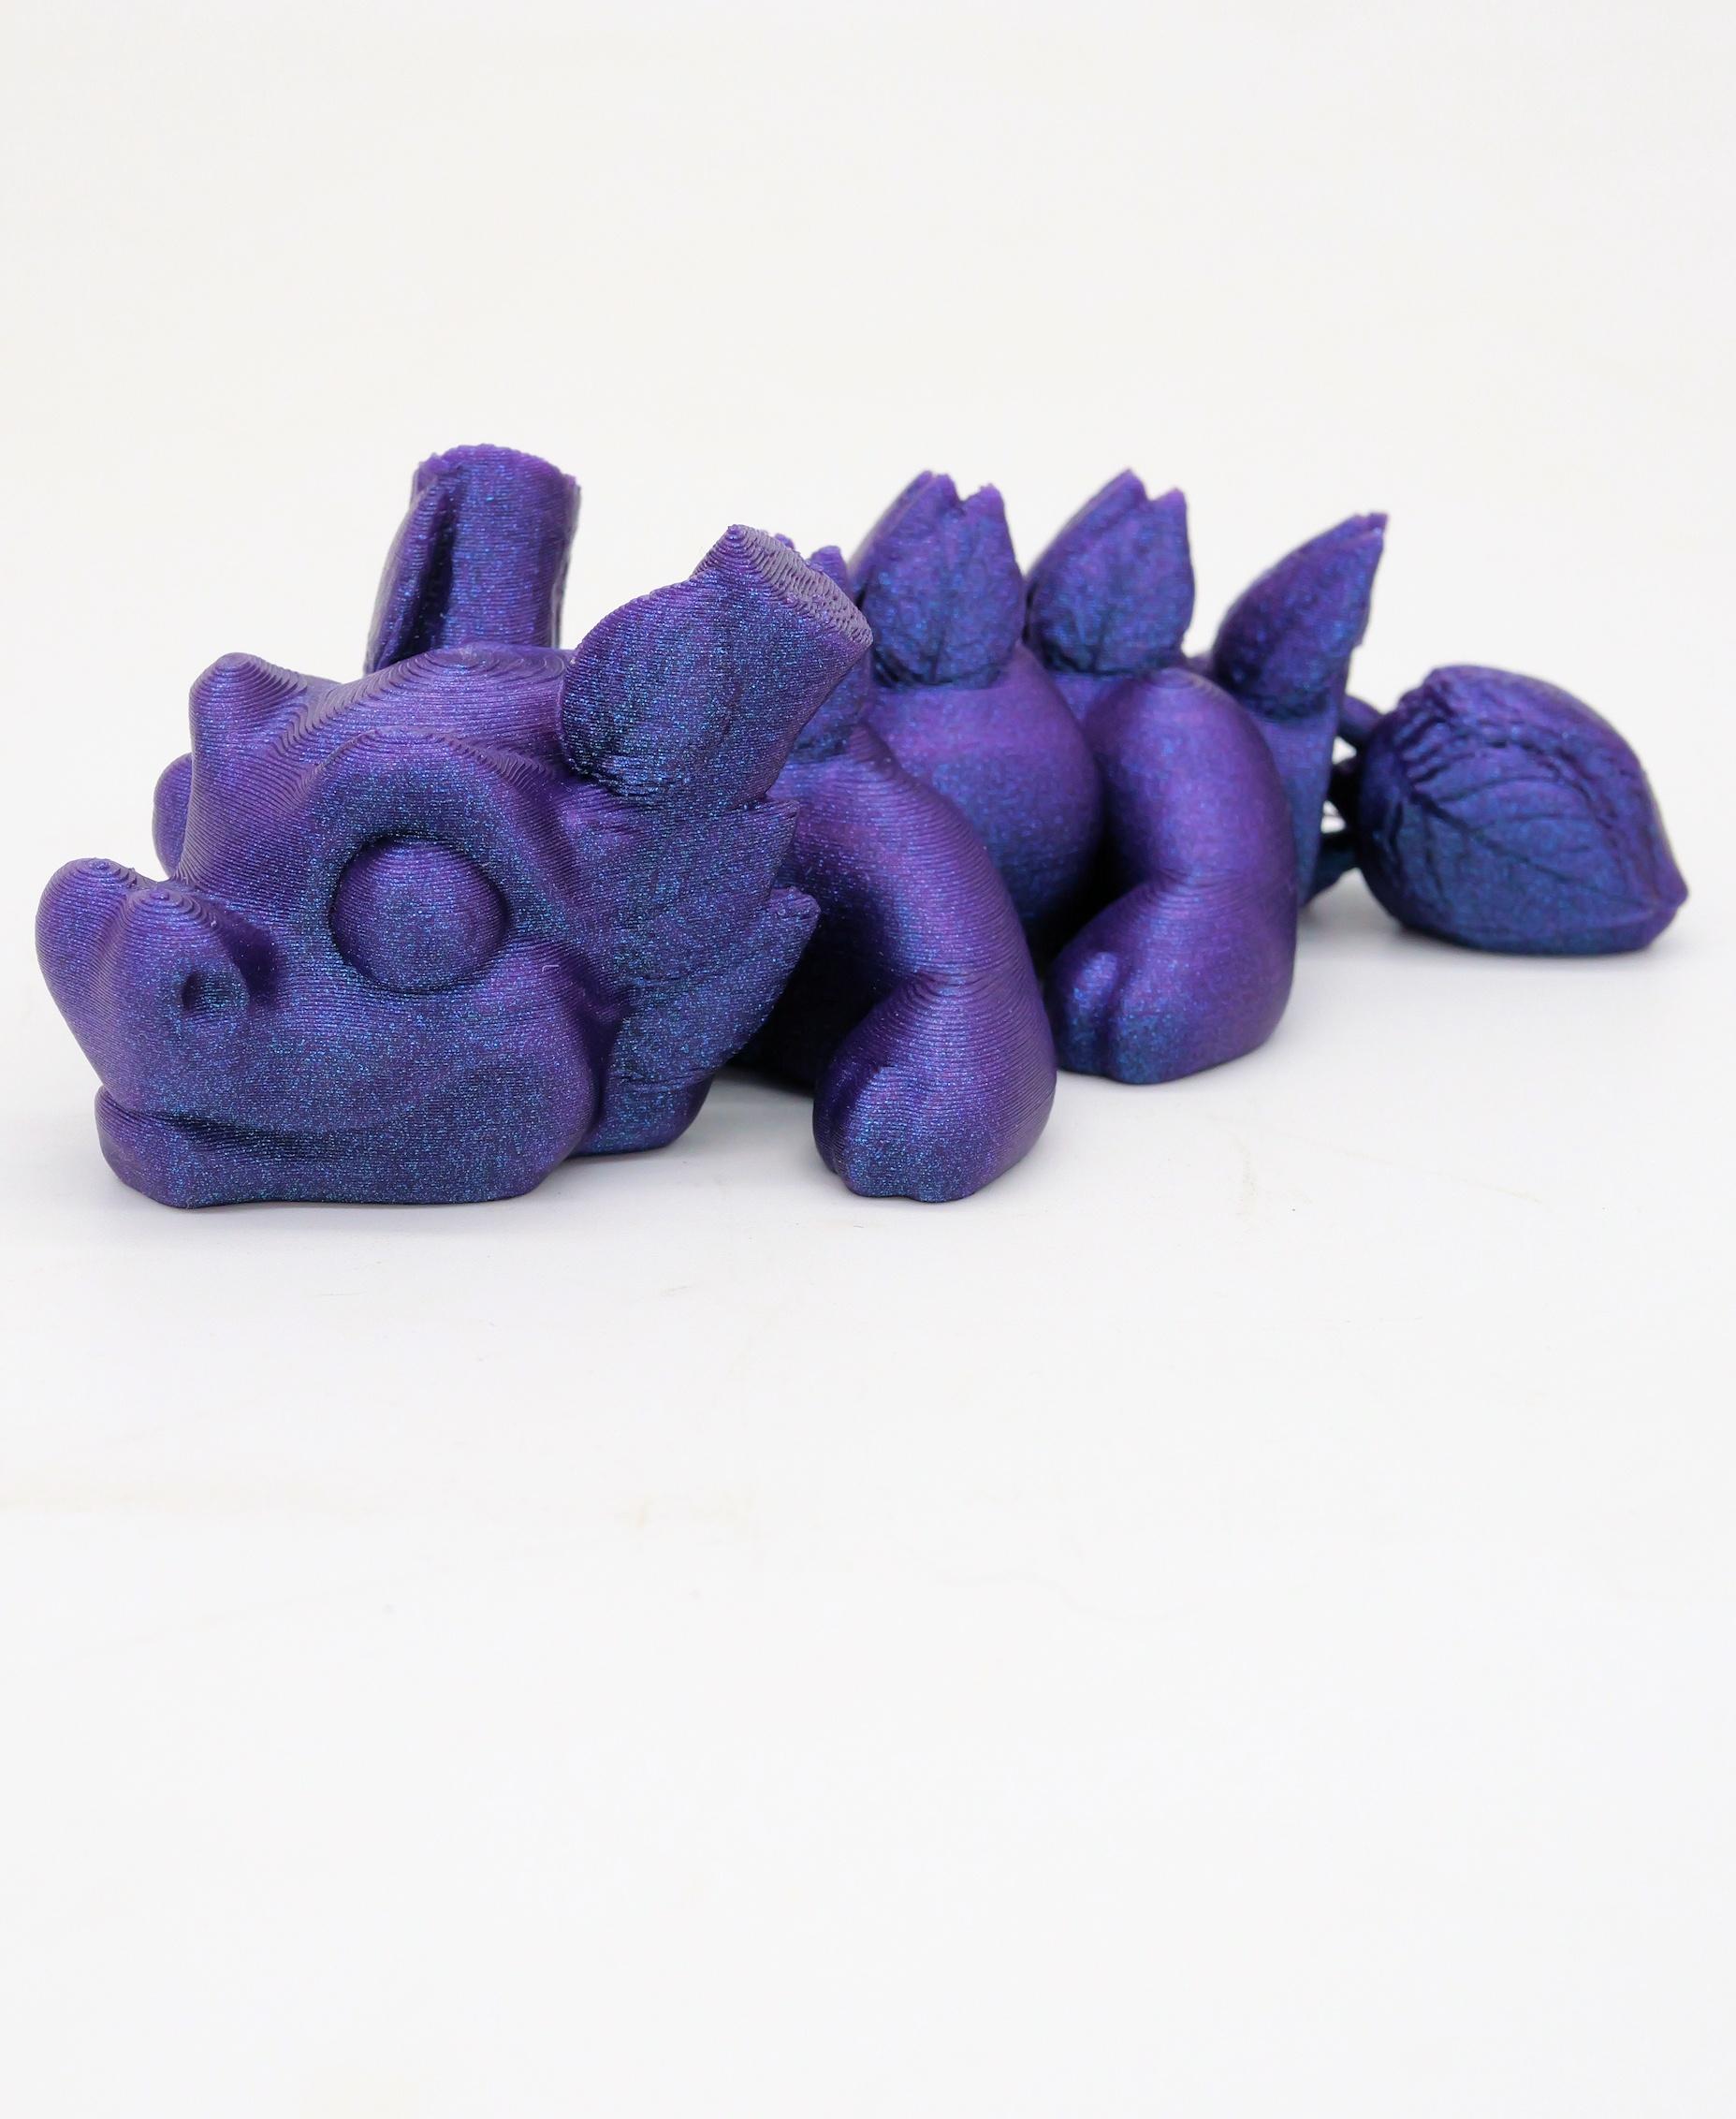 Sprout, Baby Wood Dragon - Articulated Dragon Snap-Flex Fidget (Medium Joints) 3d model